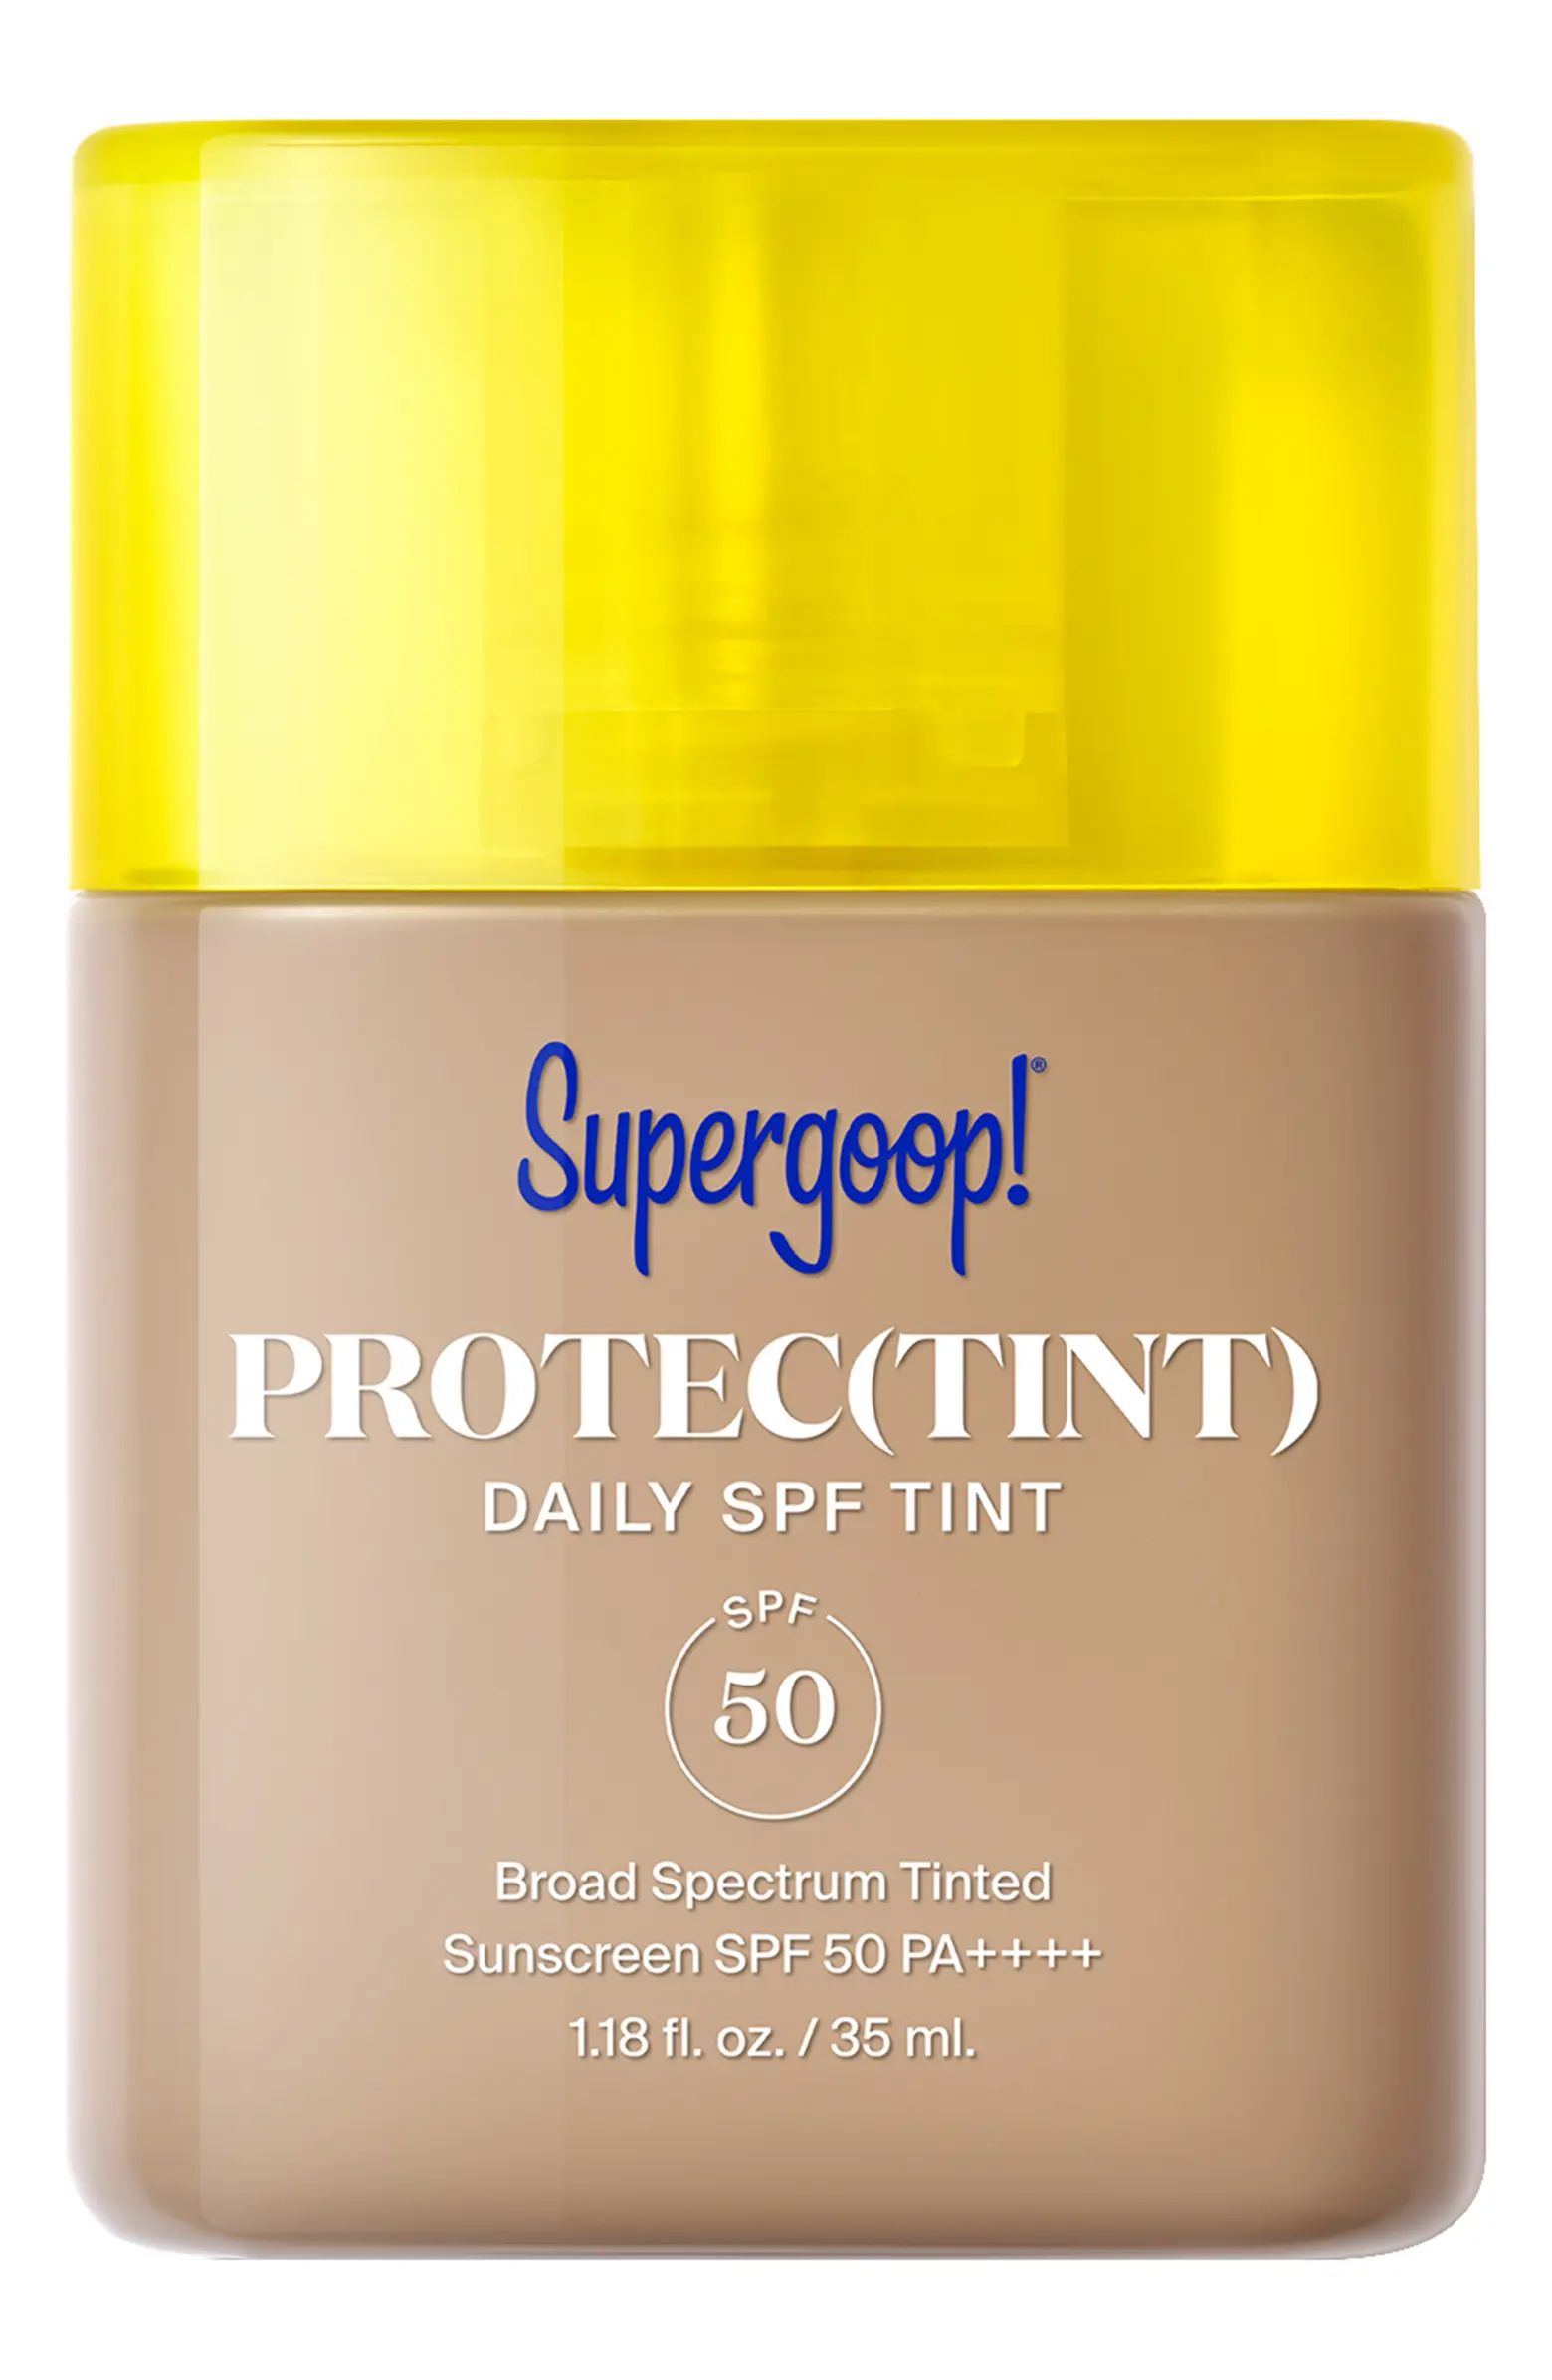 Protec(tint) Daily SPF Tint SPF 50 | Nordstrom